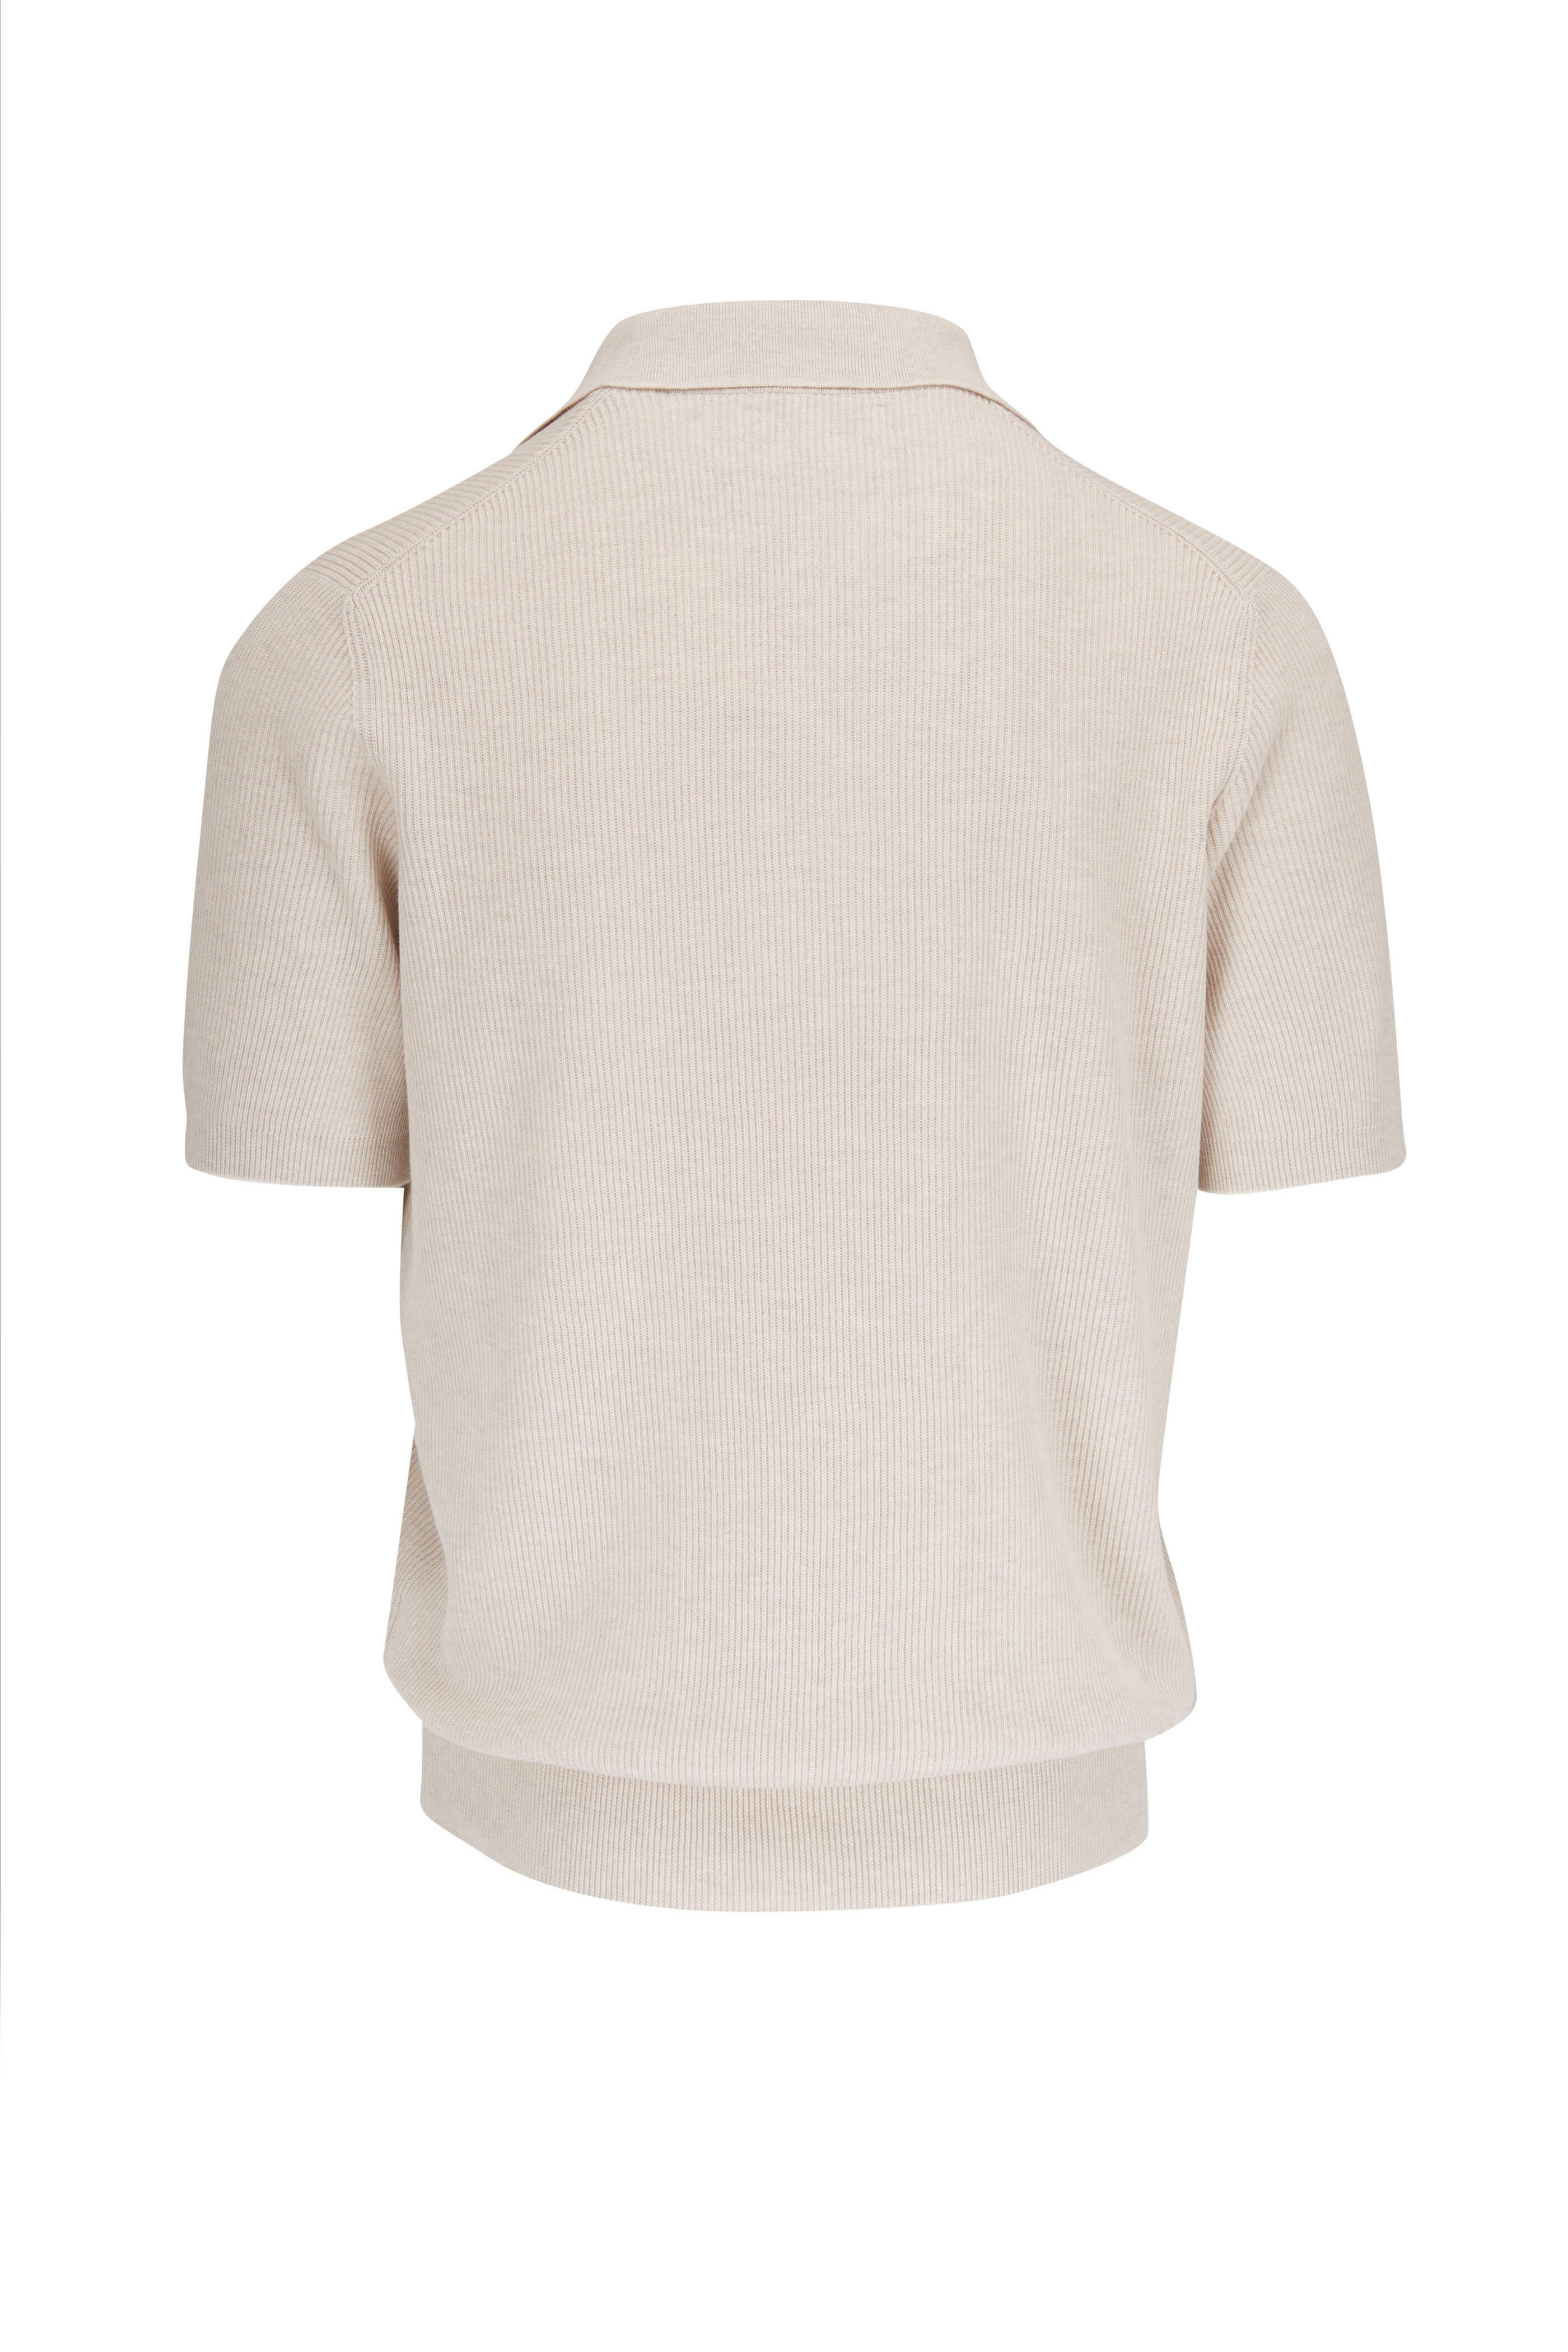 Brunello Cucinelli - Oat Cotton Ribbed Polo | Mitchell Stores